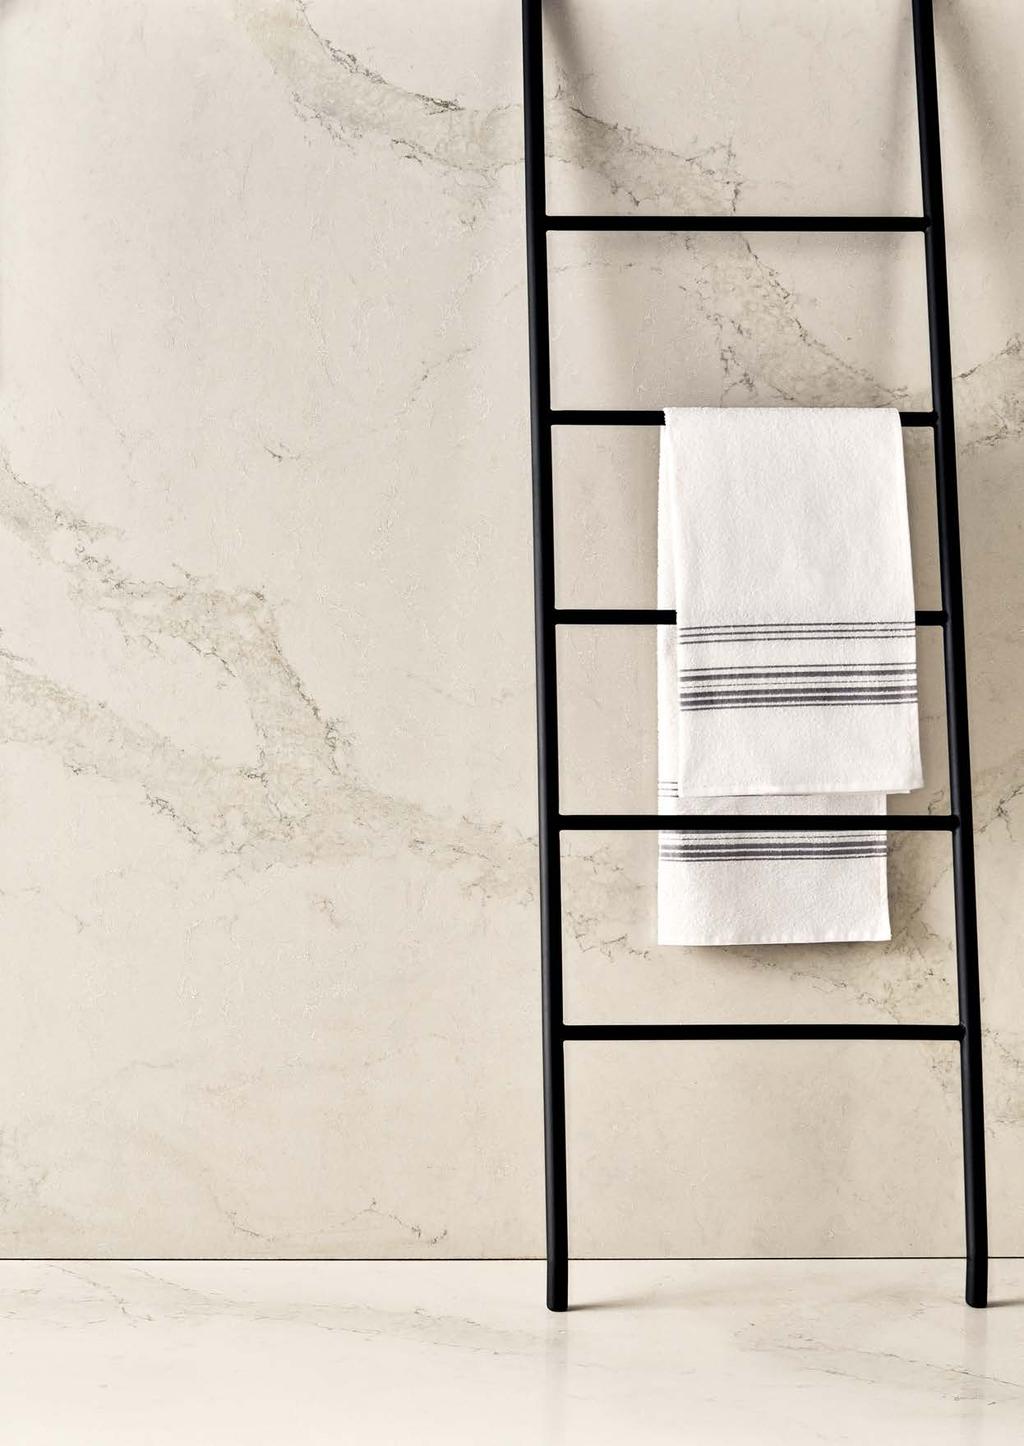 Edge Profiles Your surface is not complete without an edge profile to complement your slab selection and space. With Caesarstone, selecting the best fit is easy.